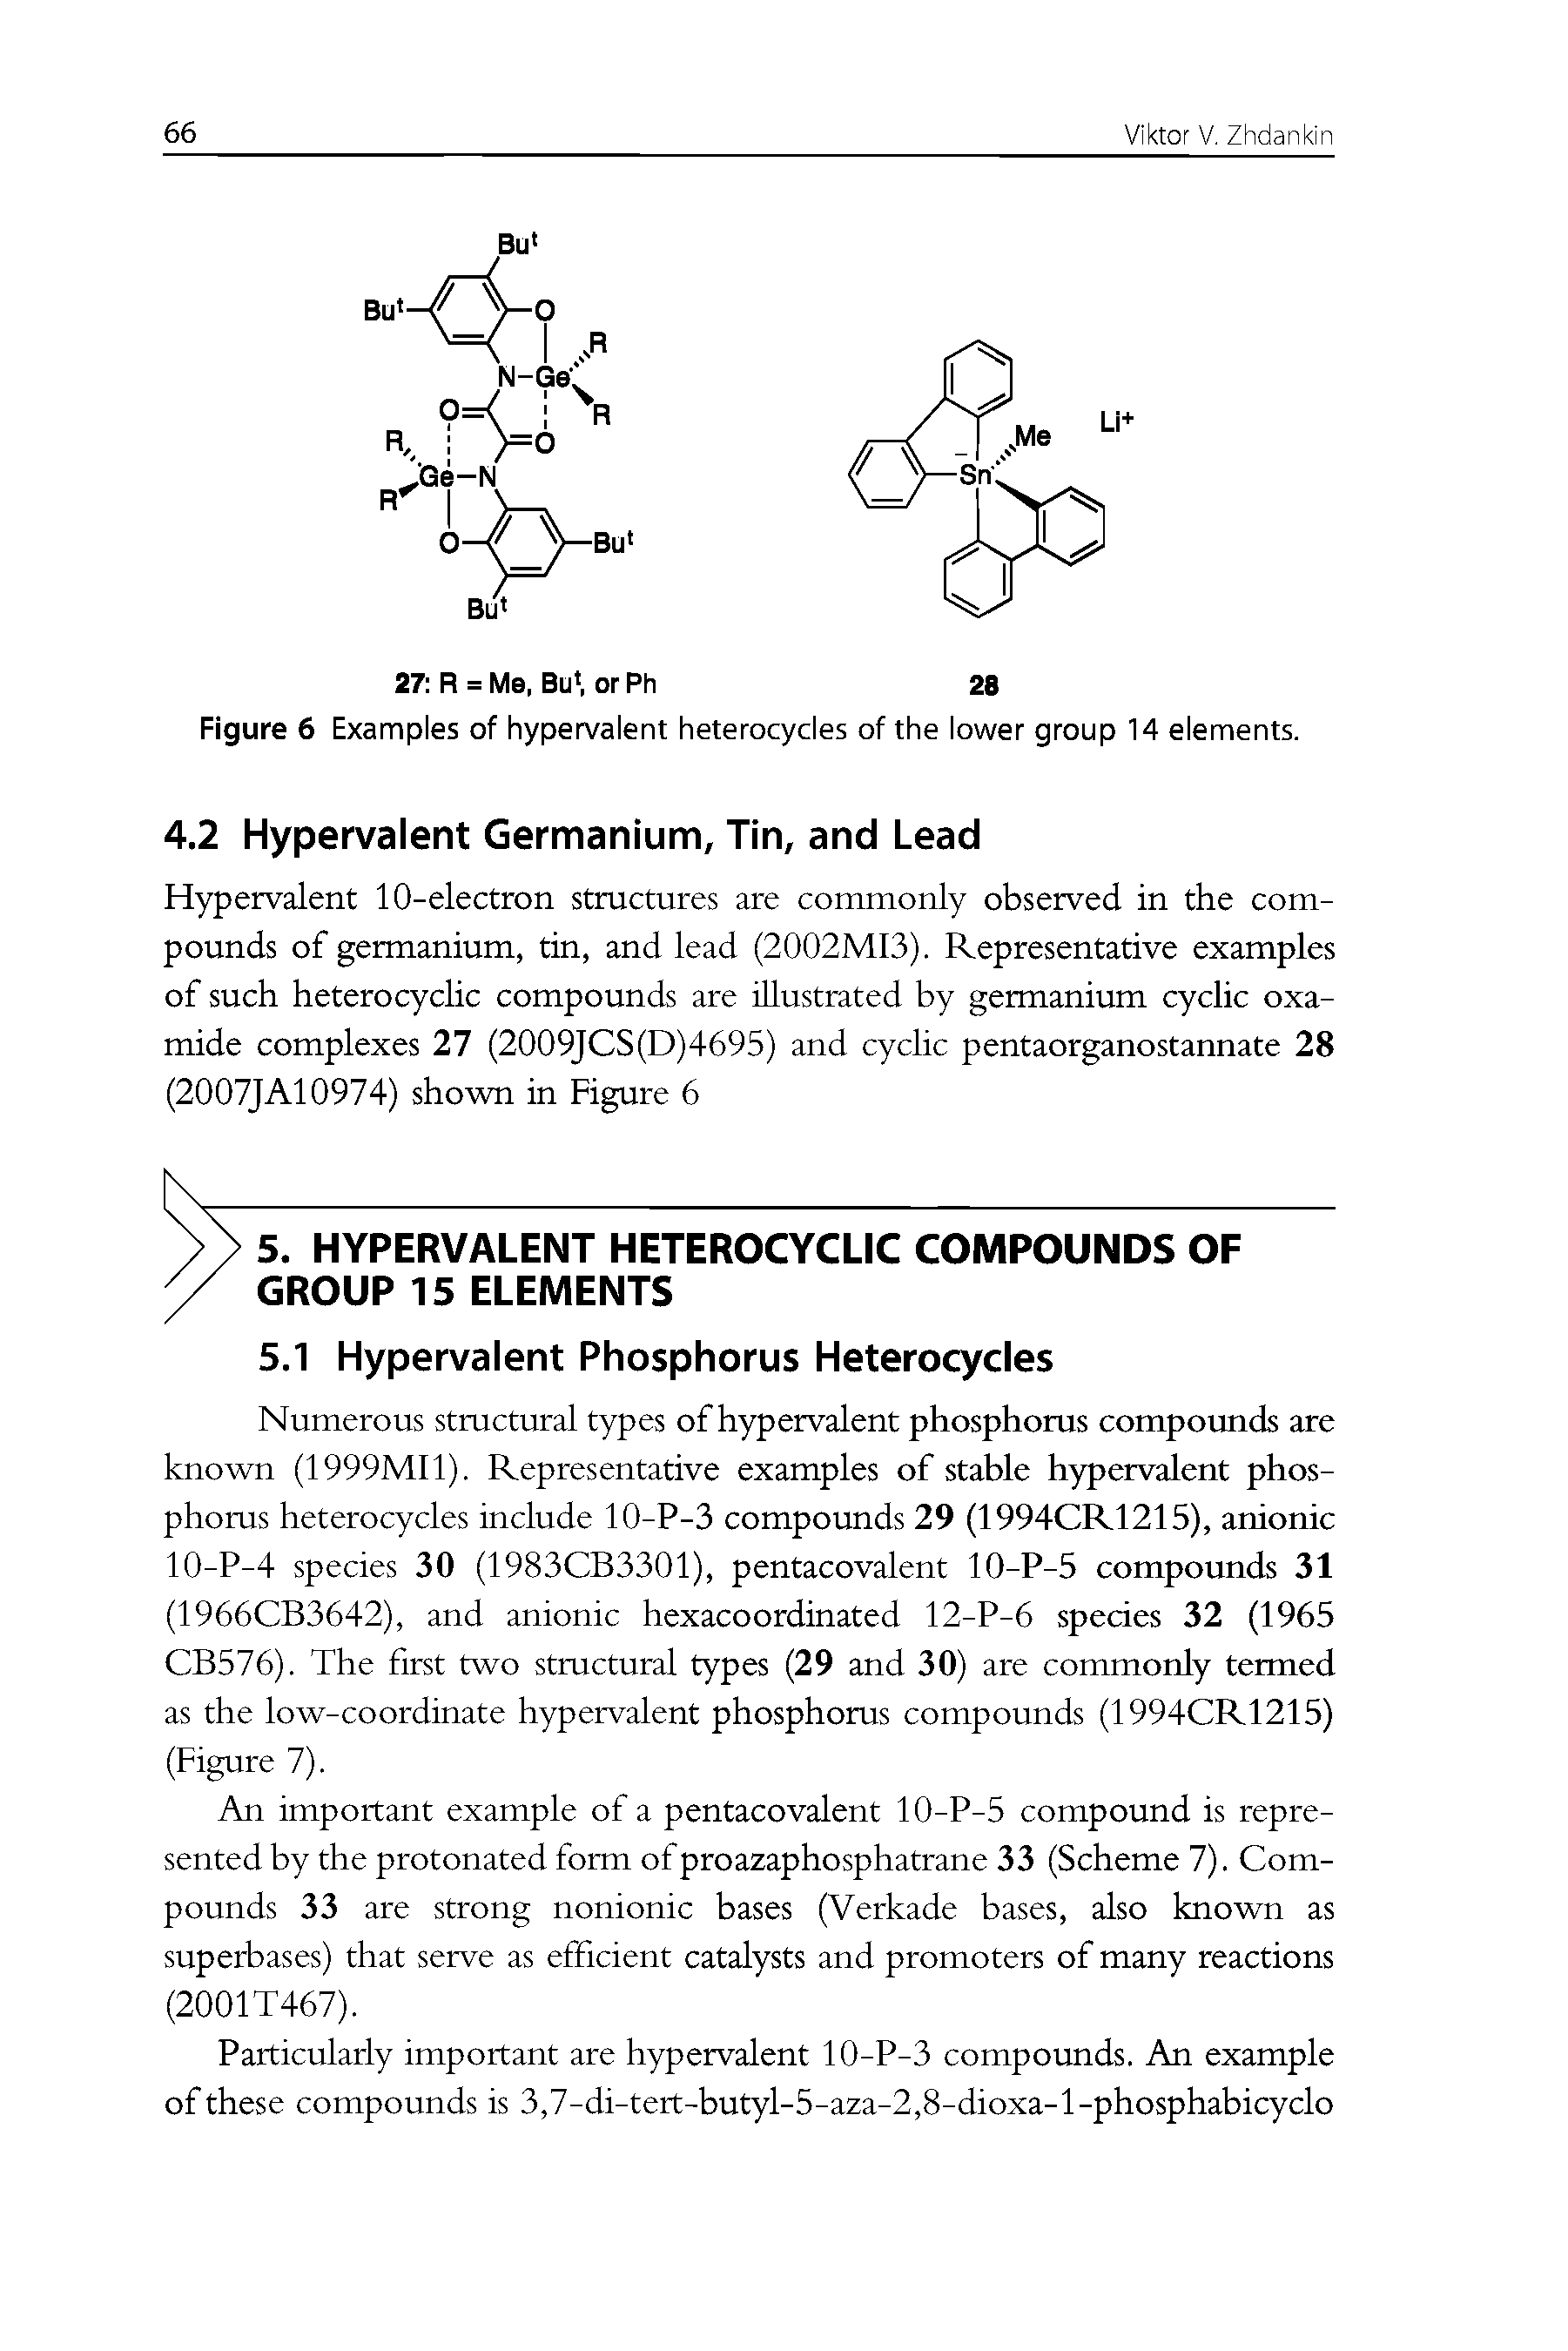 Figure 6 Examples of hypervalent heterocycles of the lower group 14 elements.